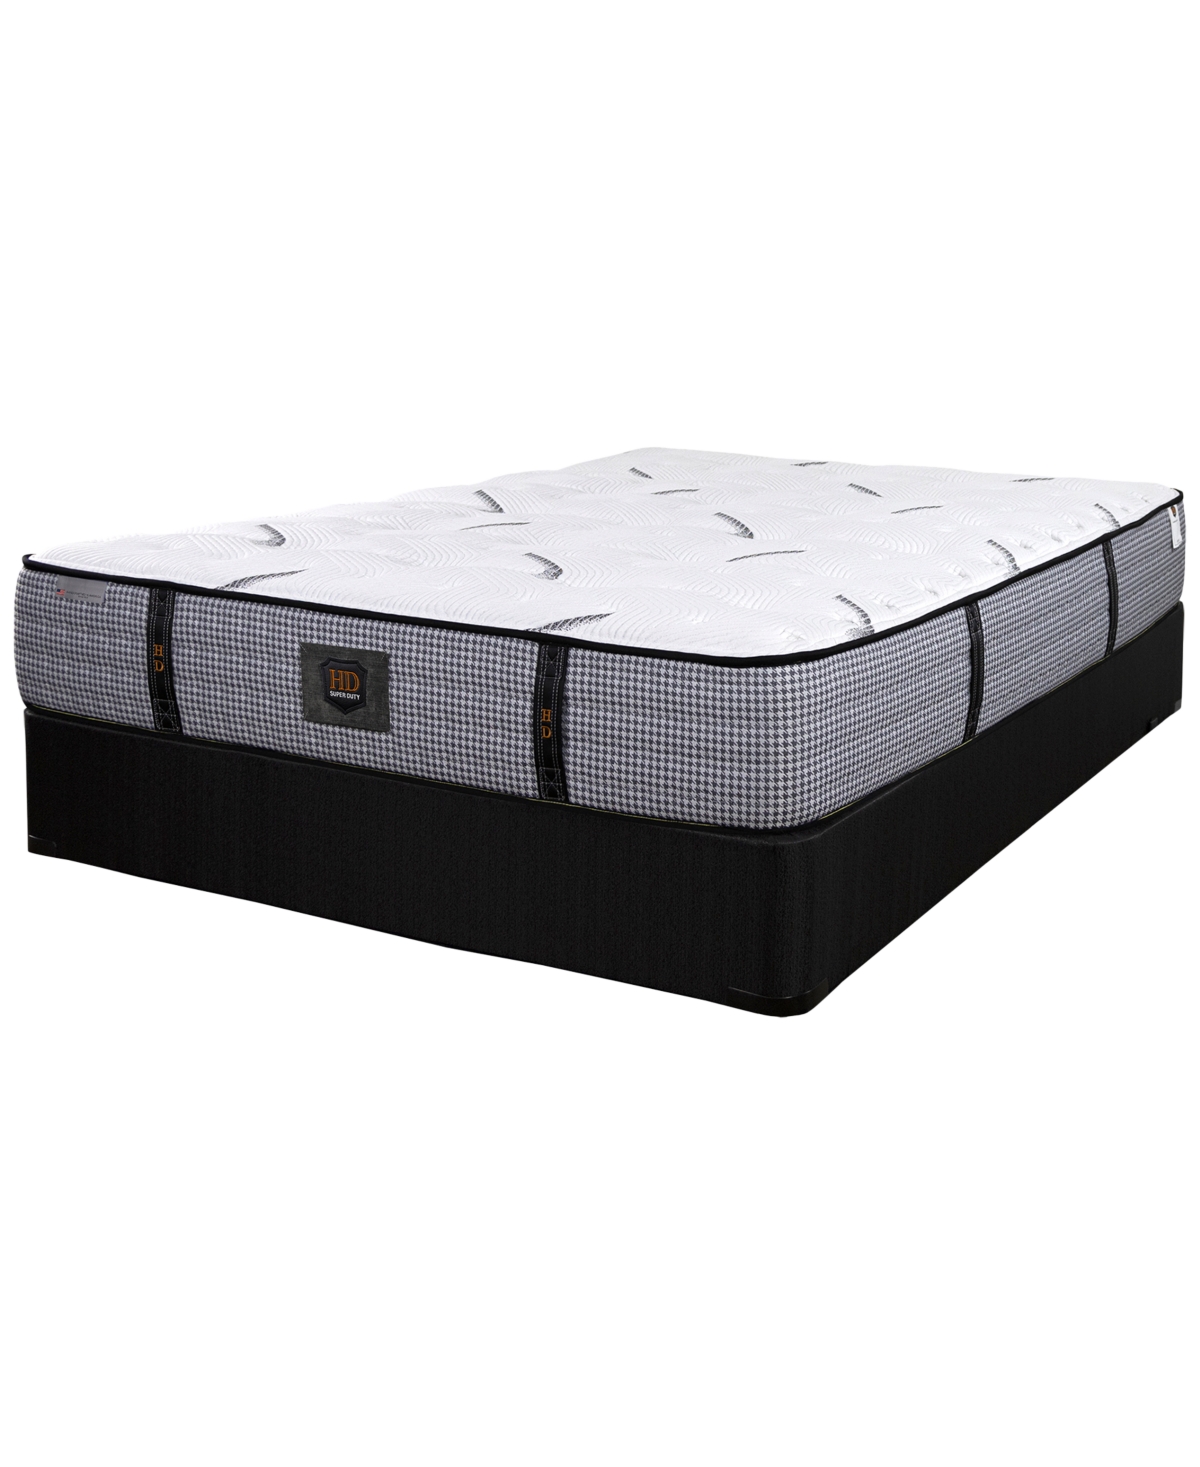 Shop Paramount Hd Granite 11" Extra Firm Mattress Set In No Color